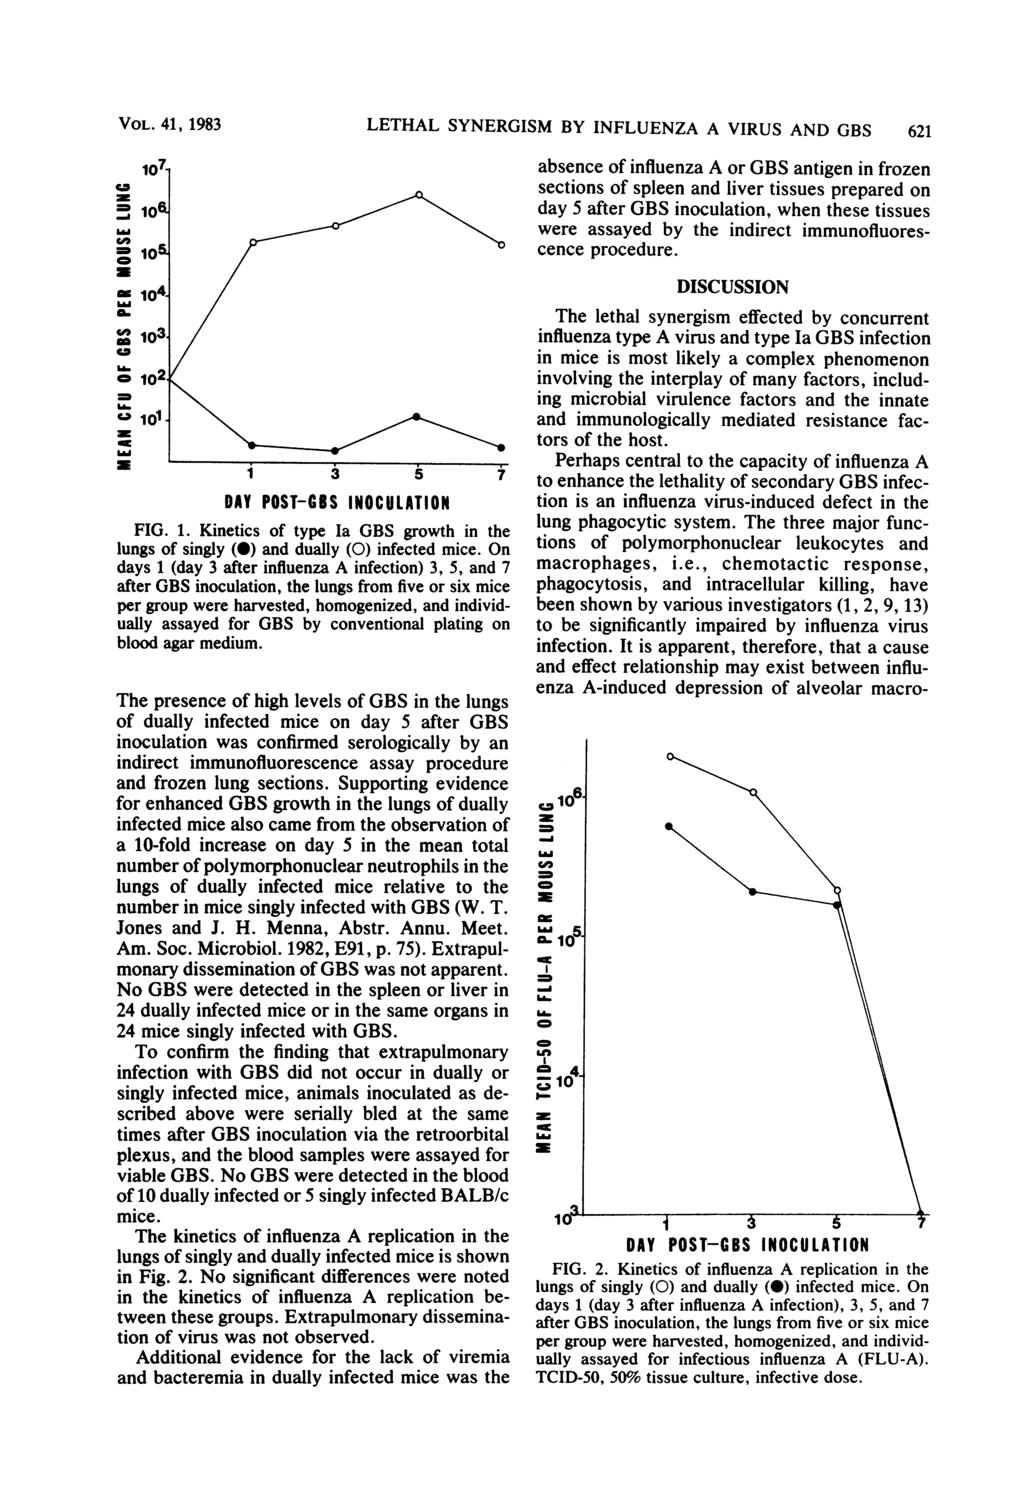 VOL. 41, 1983 '104 :103 X / C 102/ o 1O2i 101 a a 3 5 7 DAY POST-GUS INOCULATION FIG. 1. Kinetics of type Ia GBS growth in the lungs of singly (0) and dually (0) infected mice.